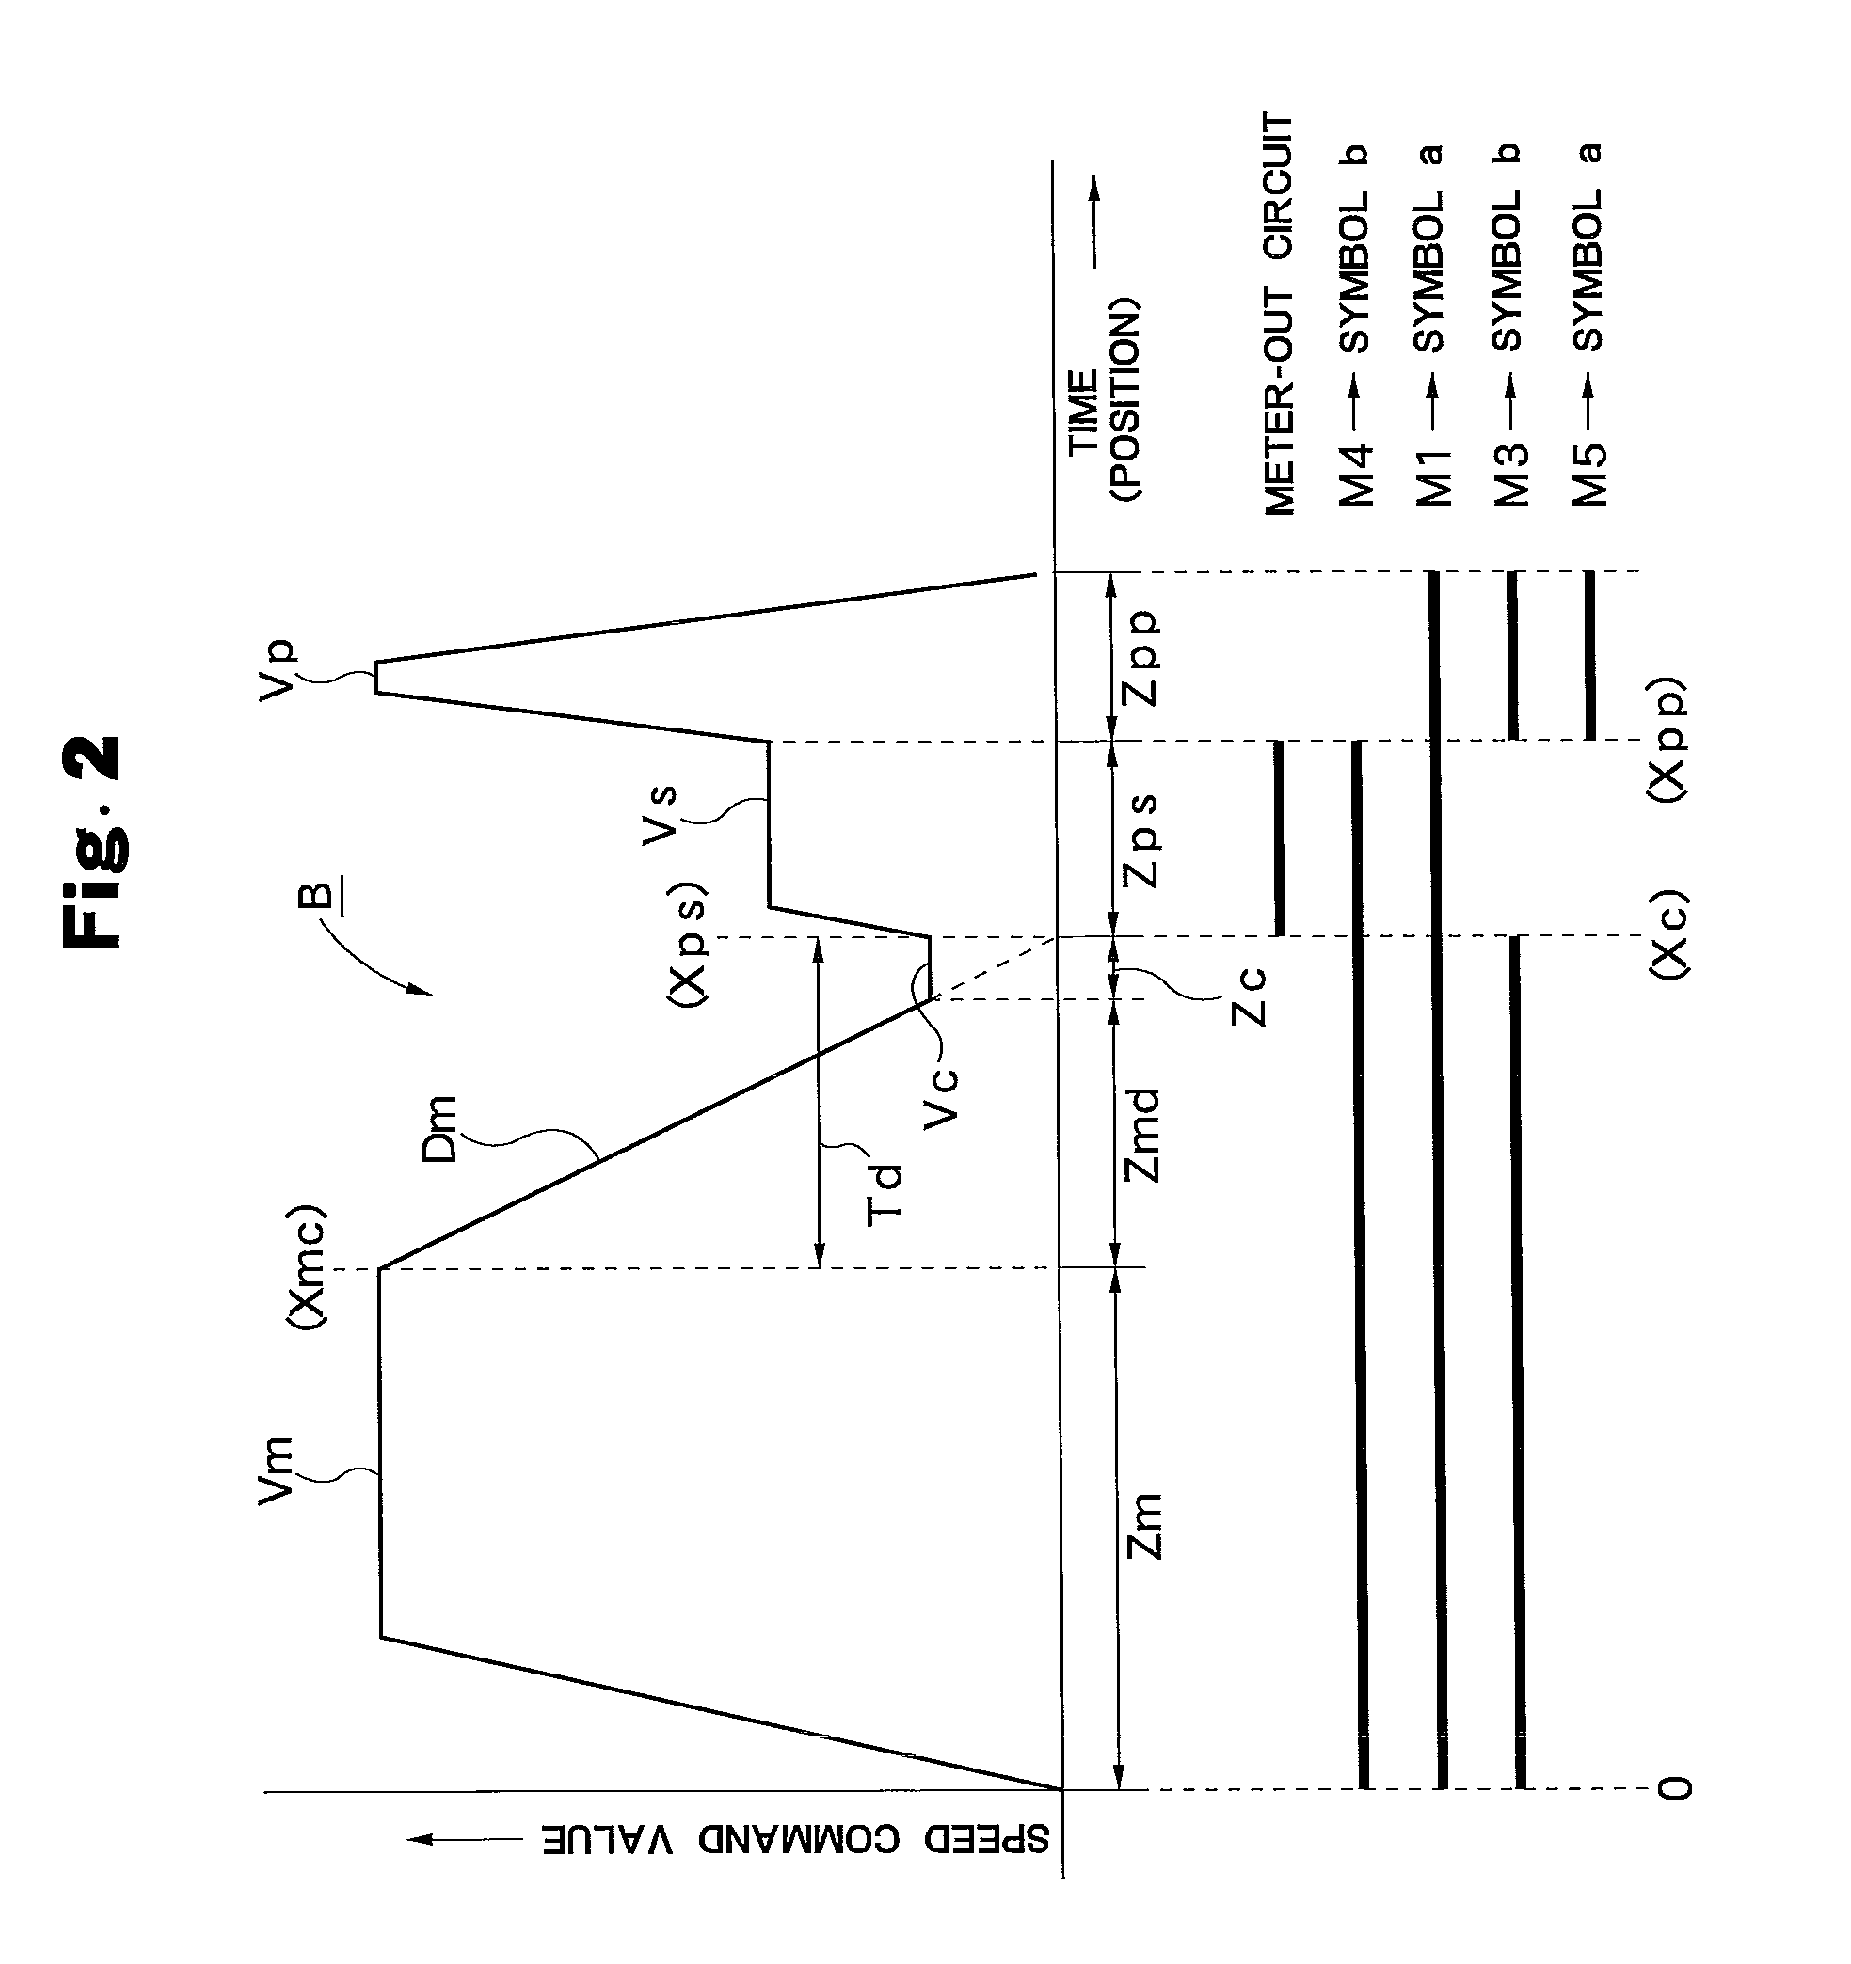 Method for controlling mold clamping device